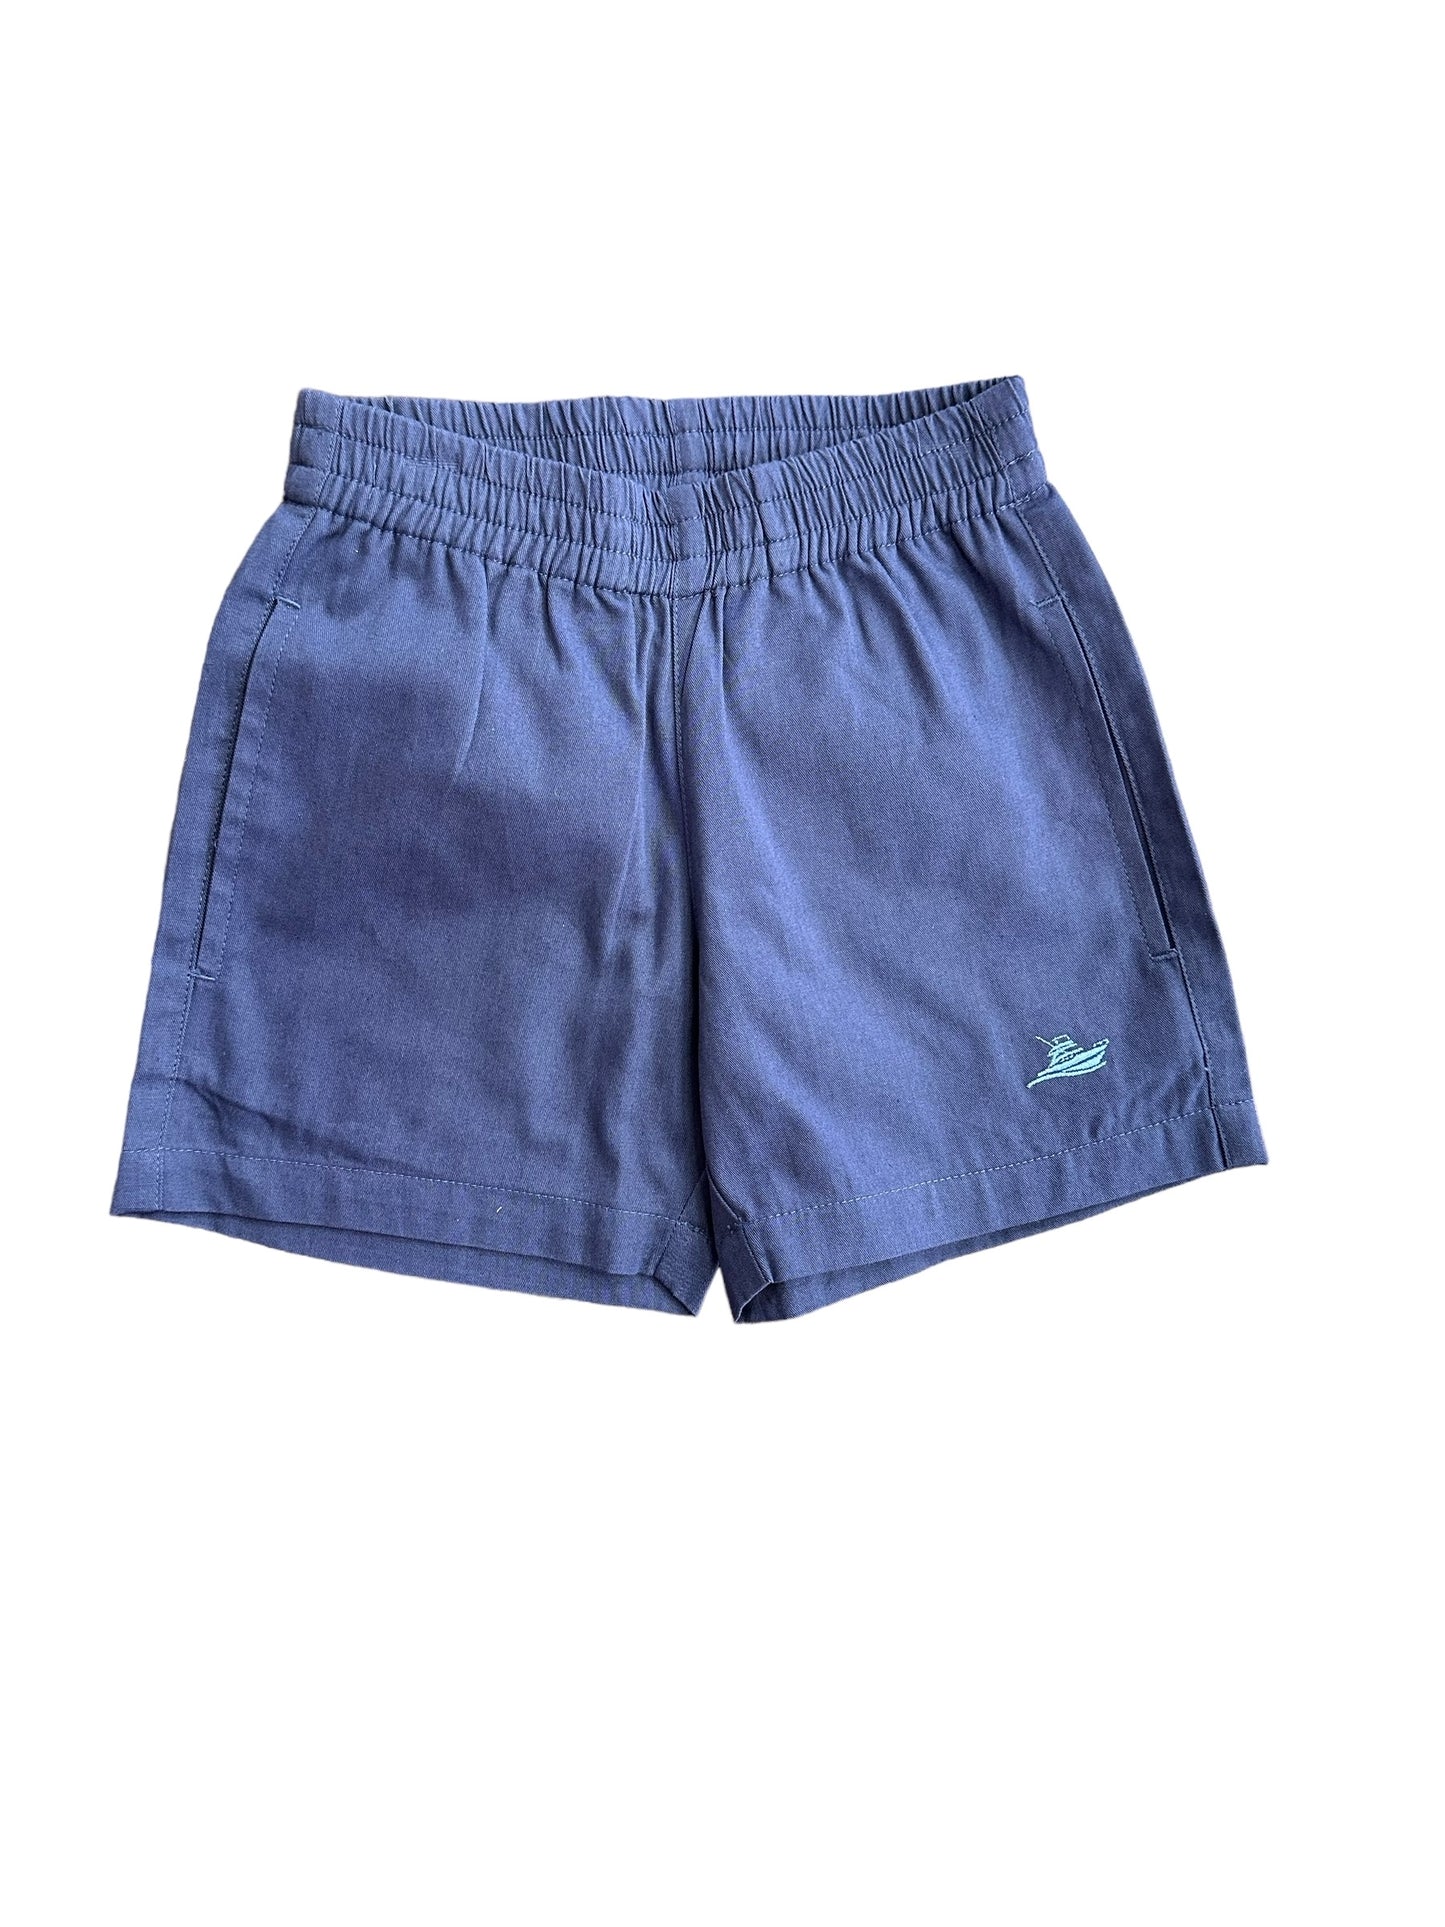 Southbound twill shorts